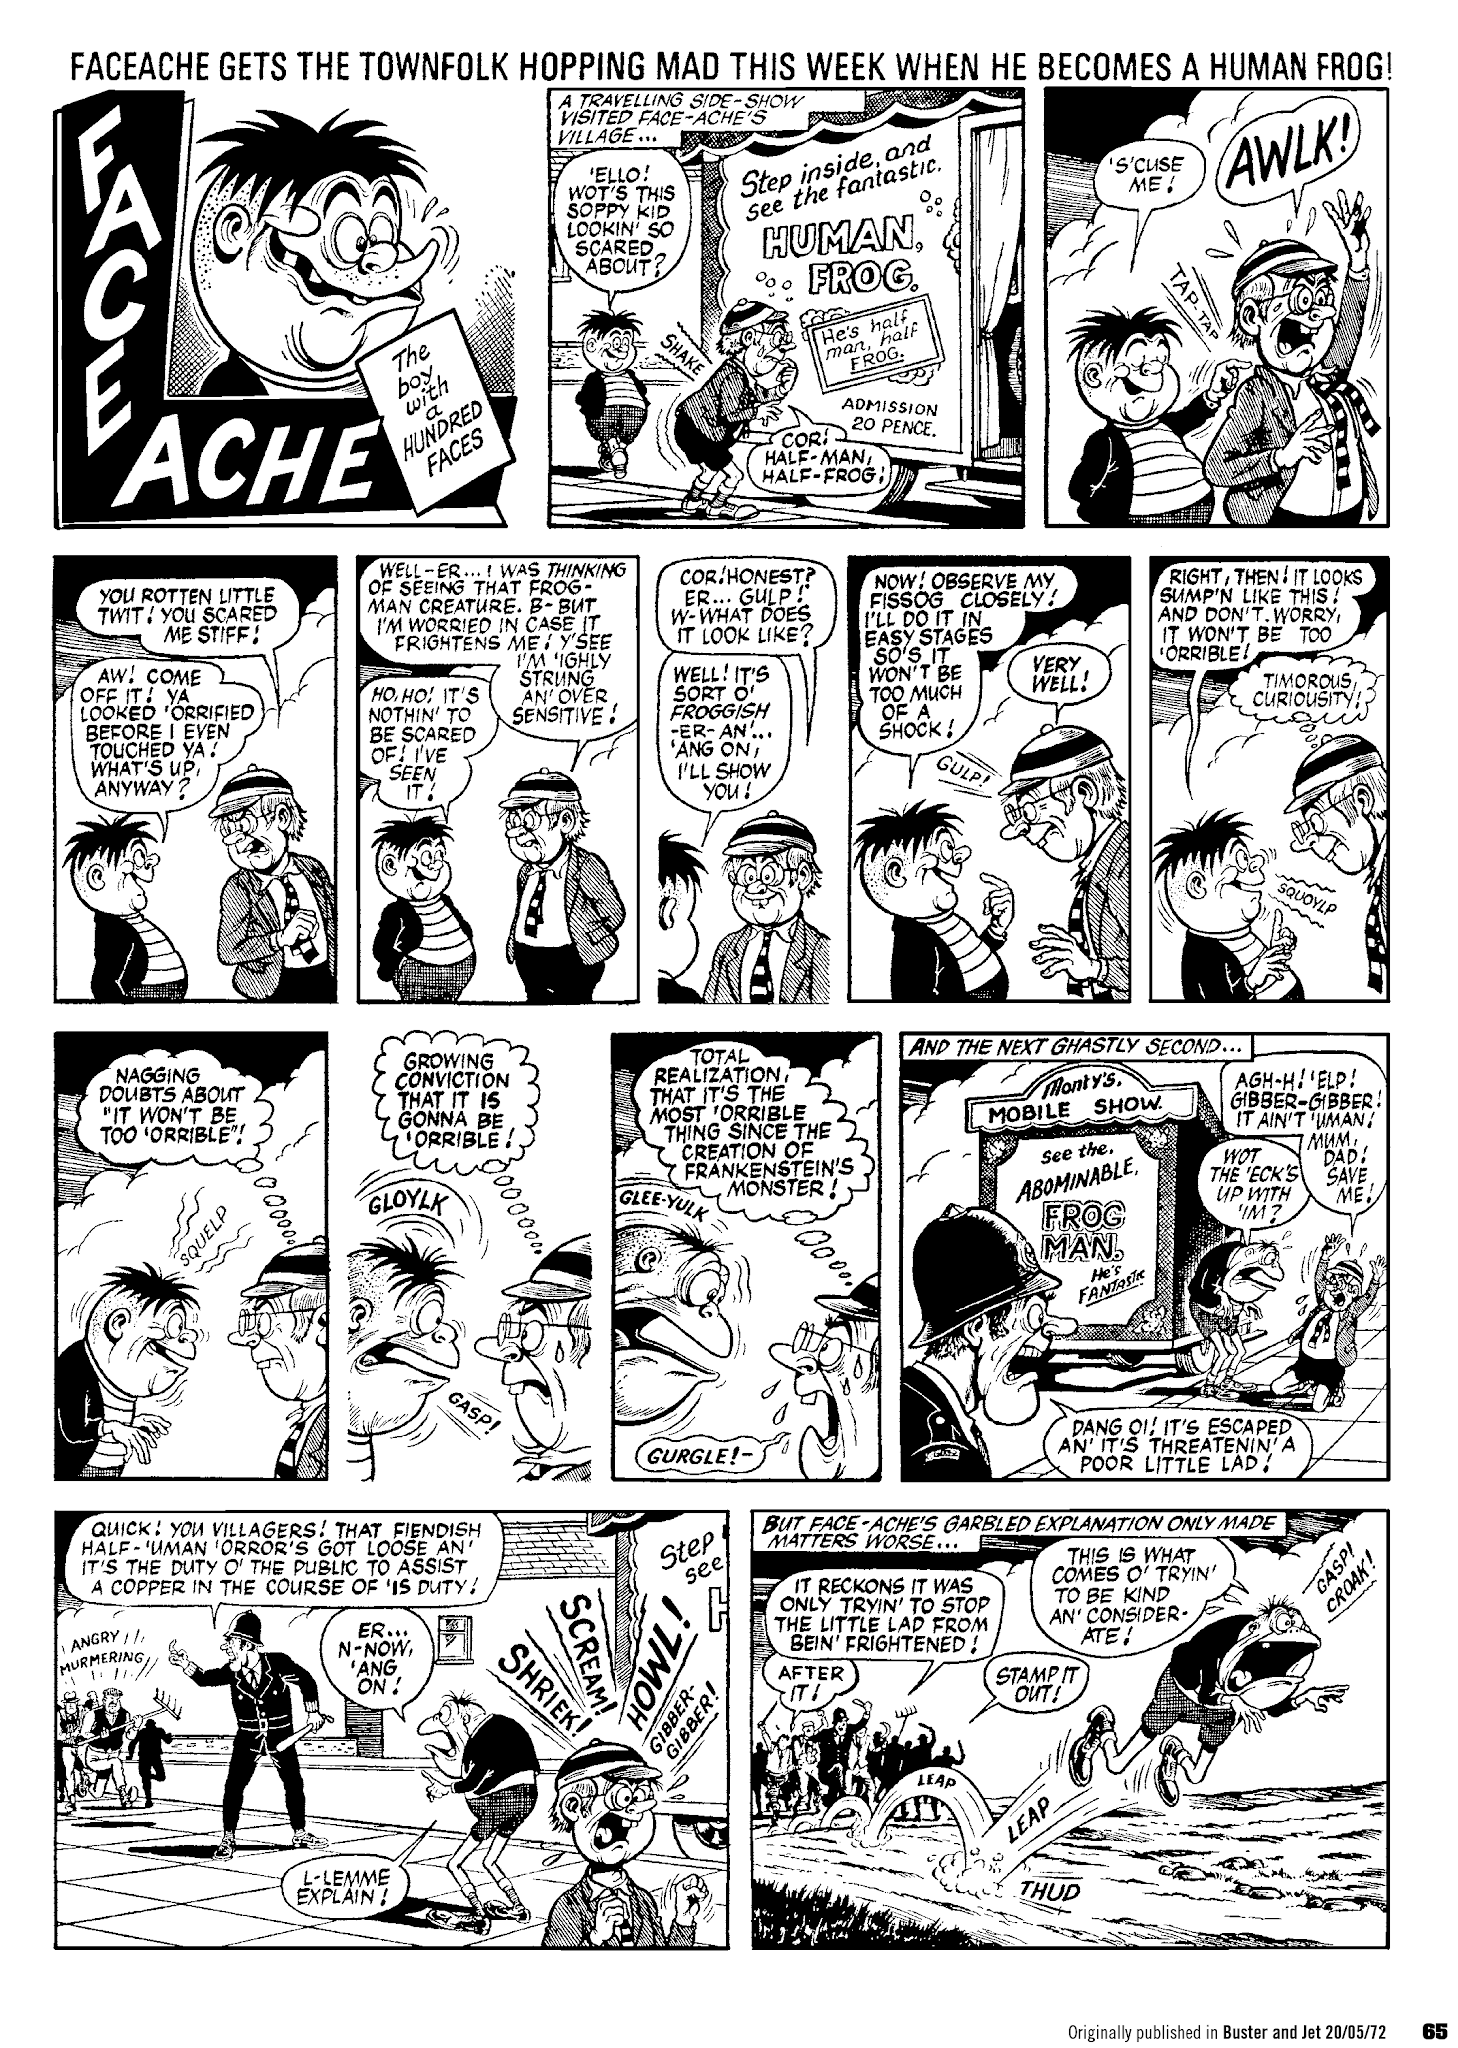 Read online Faceache: The First Hundred Scrunges comic -  Issue # TPB 1 - 67